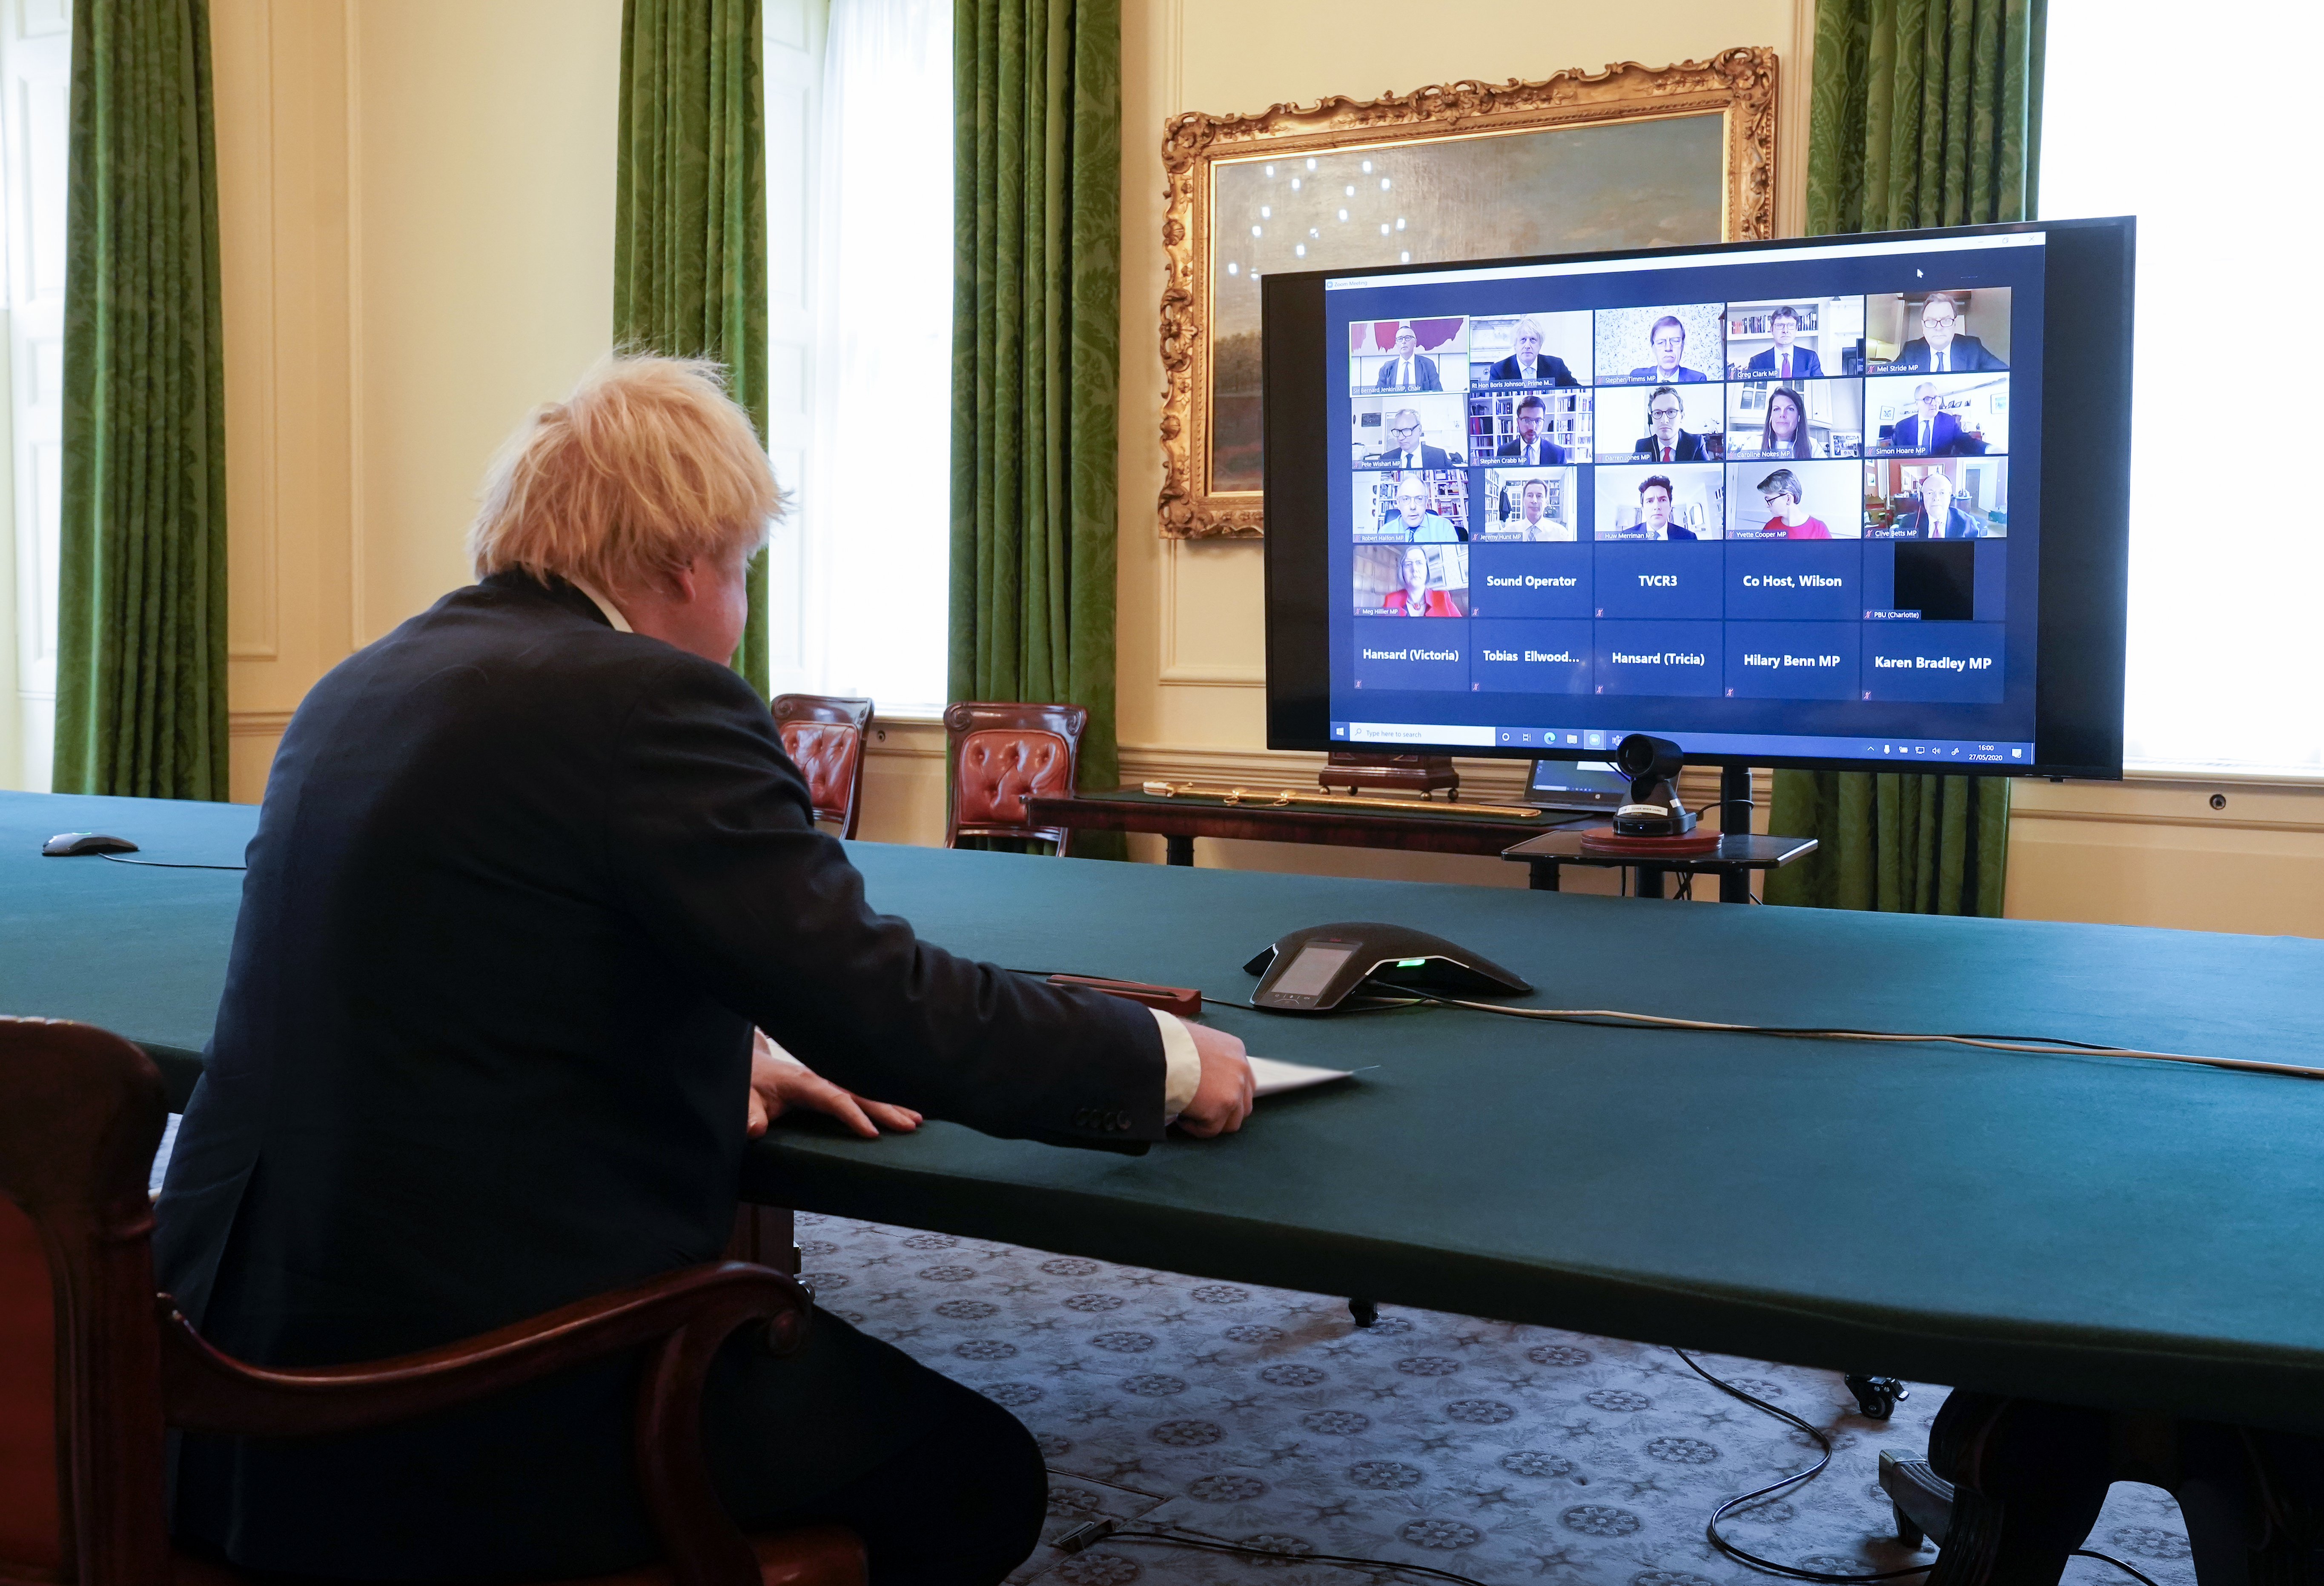 Boris Johnson's appearance before the House of Commons Liaison Committee